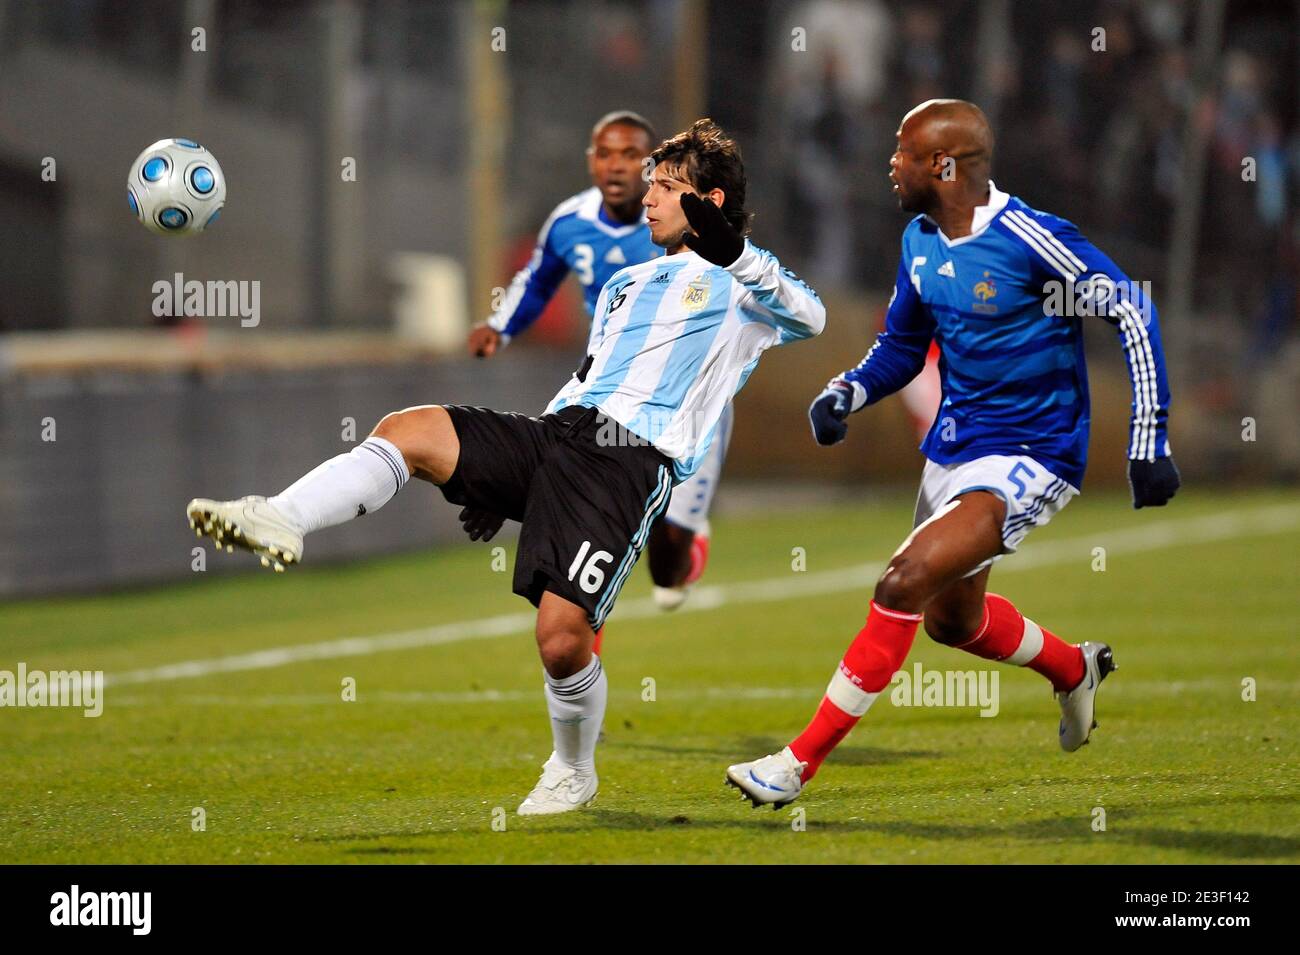 Argentina's Sergio Aguero and France's William Gallas during the International Friendly Soccer match, France vs Argentina at the velodrome Stadium in Marseille, France on February 11, 2009. Argentina won 2-0. Photo by Stephane Reix/ABACAPRESS.COM Stock Photo